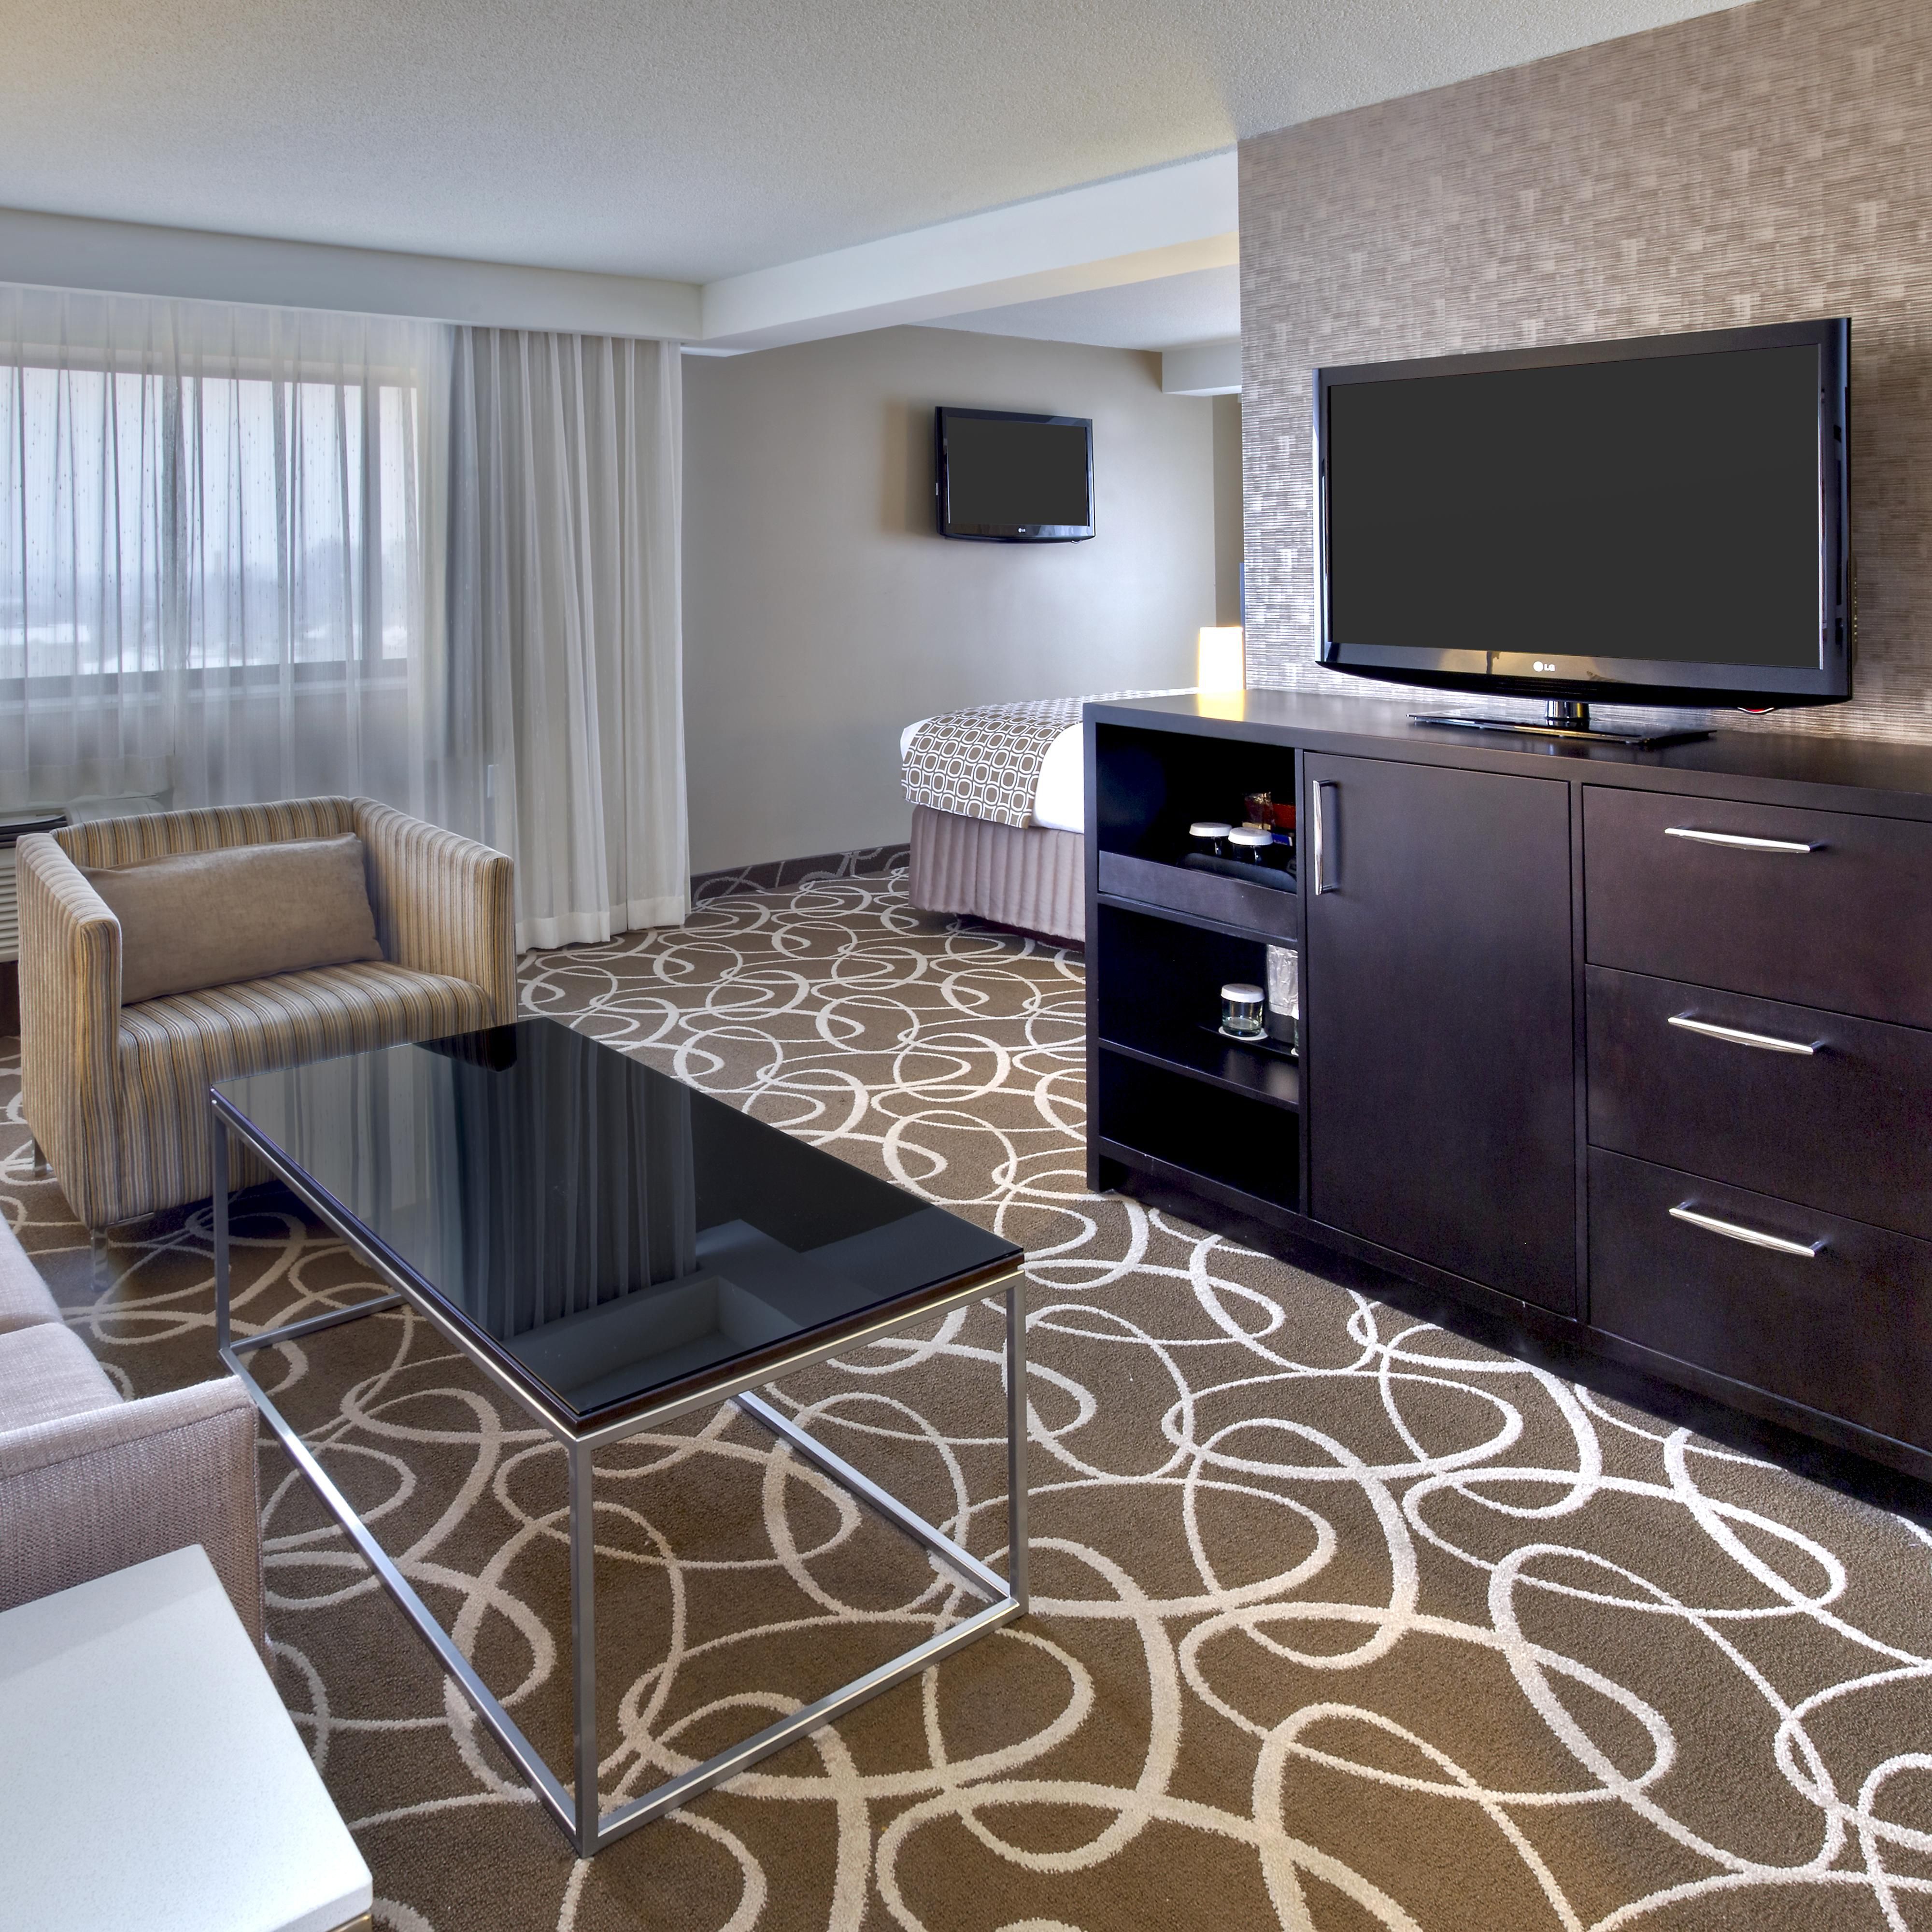 Unwind in your suite while you watch your favorite TV show.